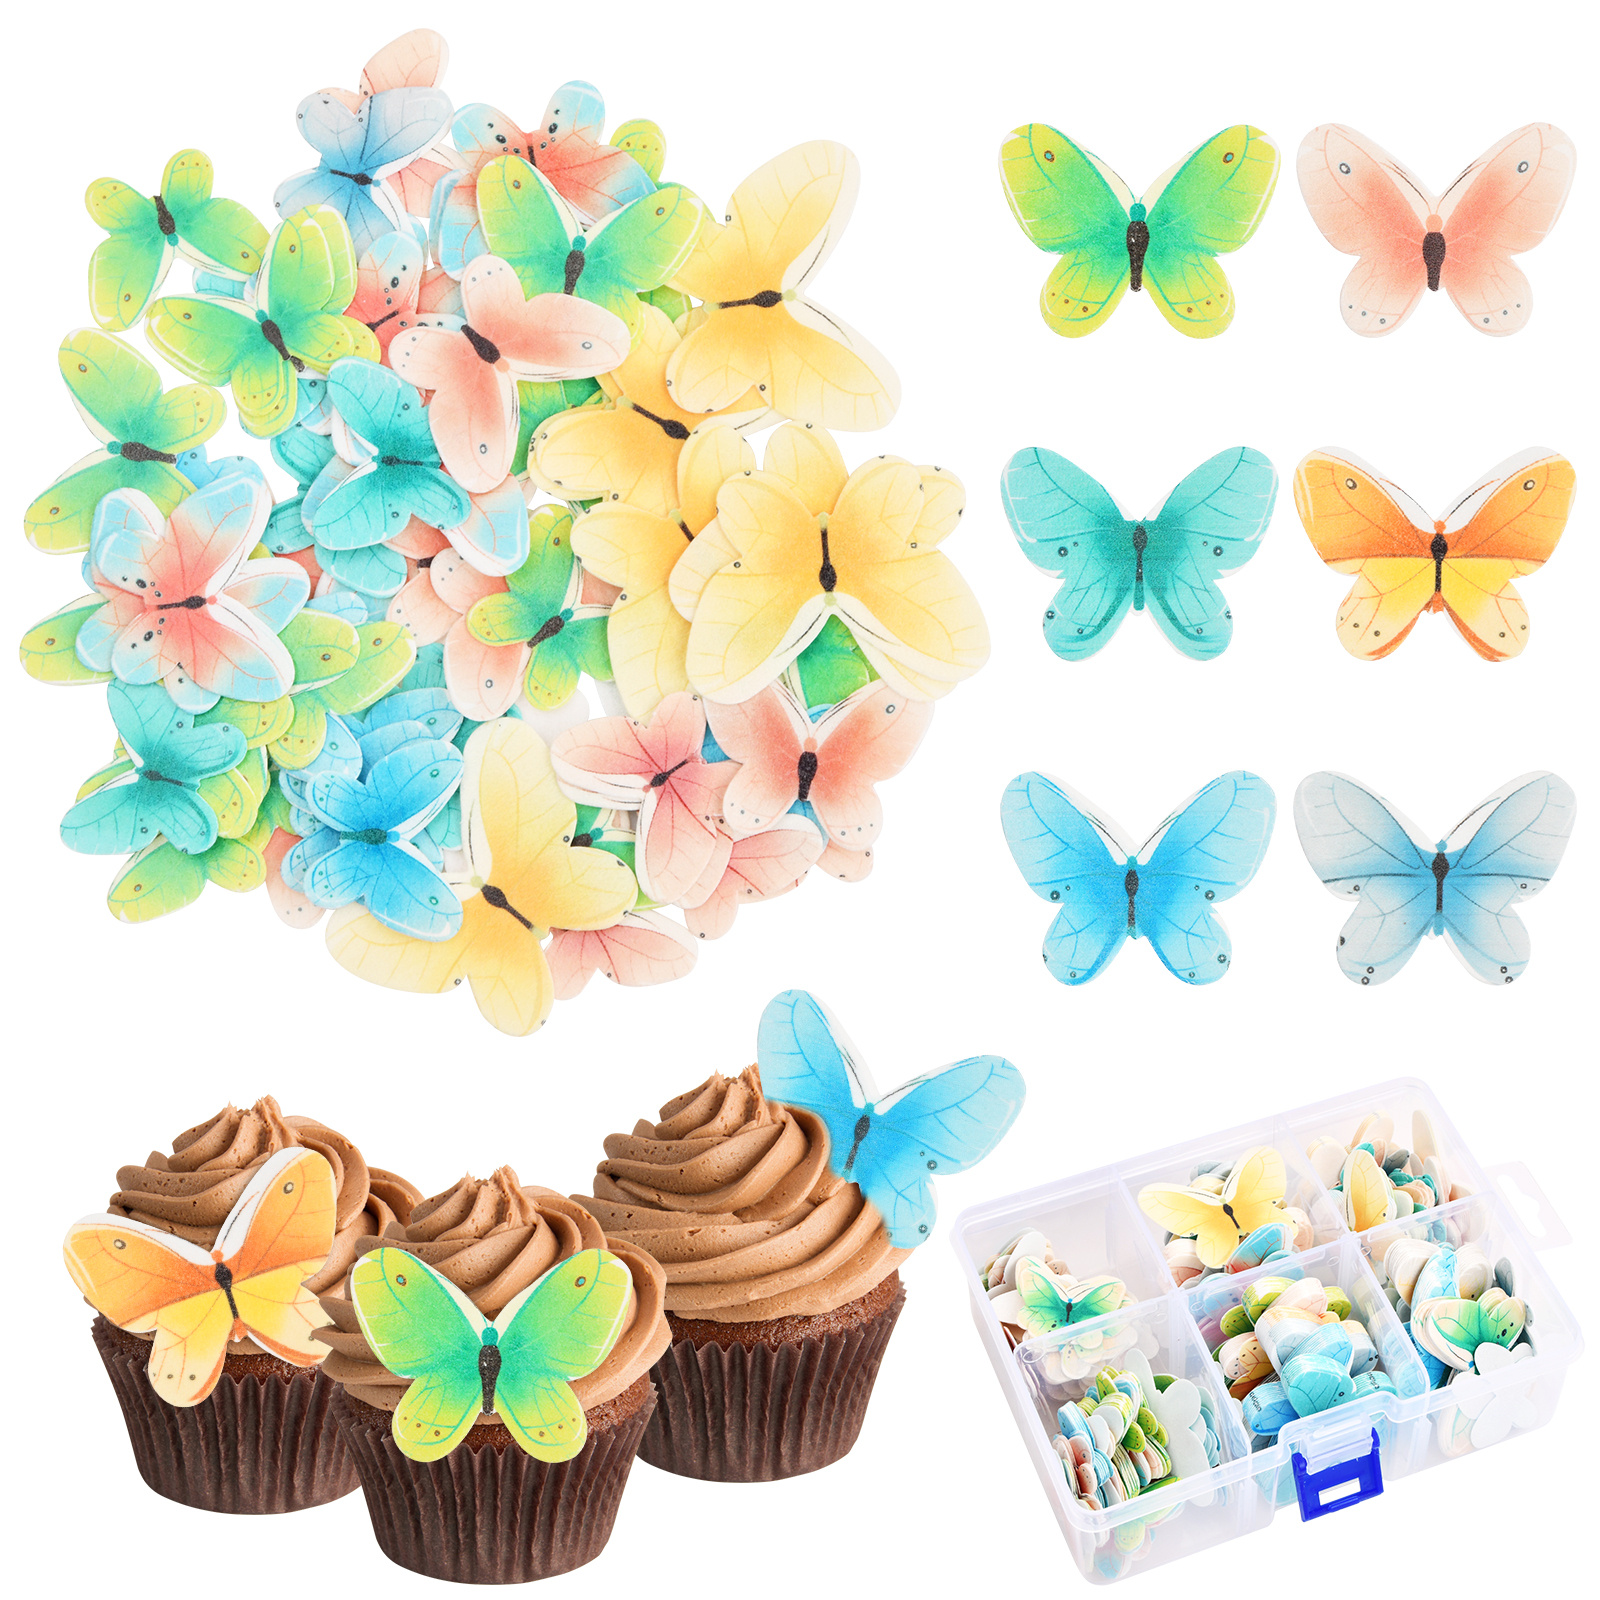 Edible Mixed Bees Glutinous Wafer Rice Paper Cake Dessert Toppers